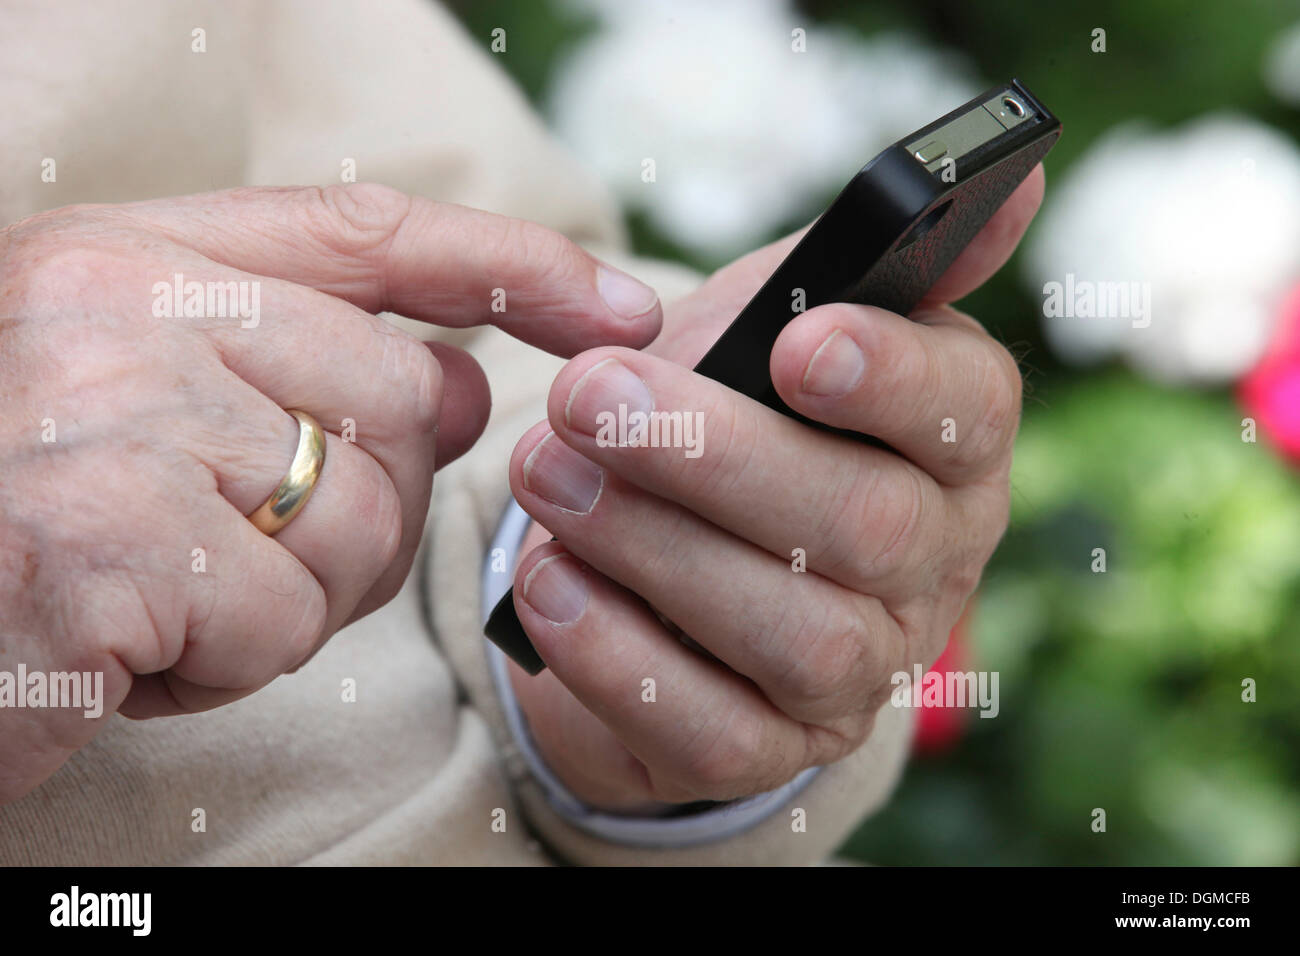 Elderly man holding a smartphone in his hand Stock Photo